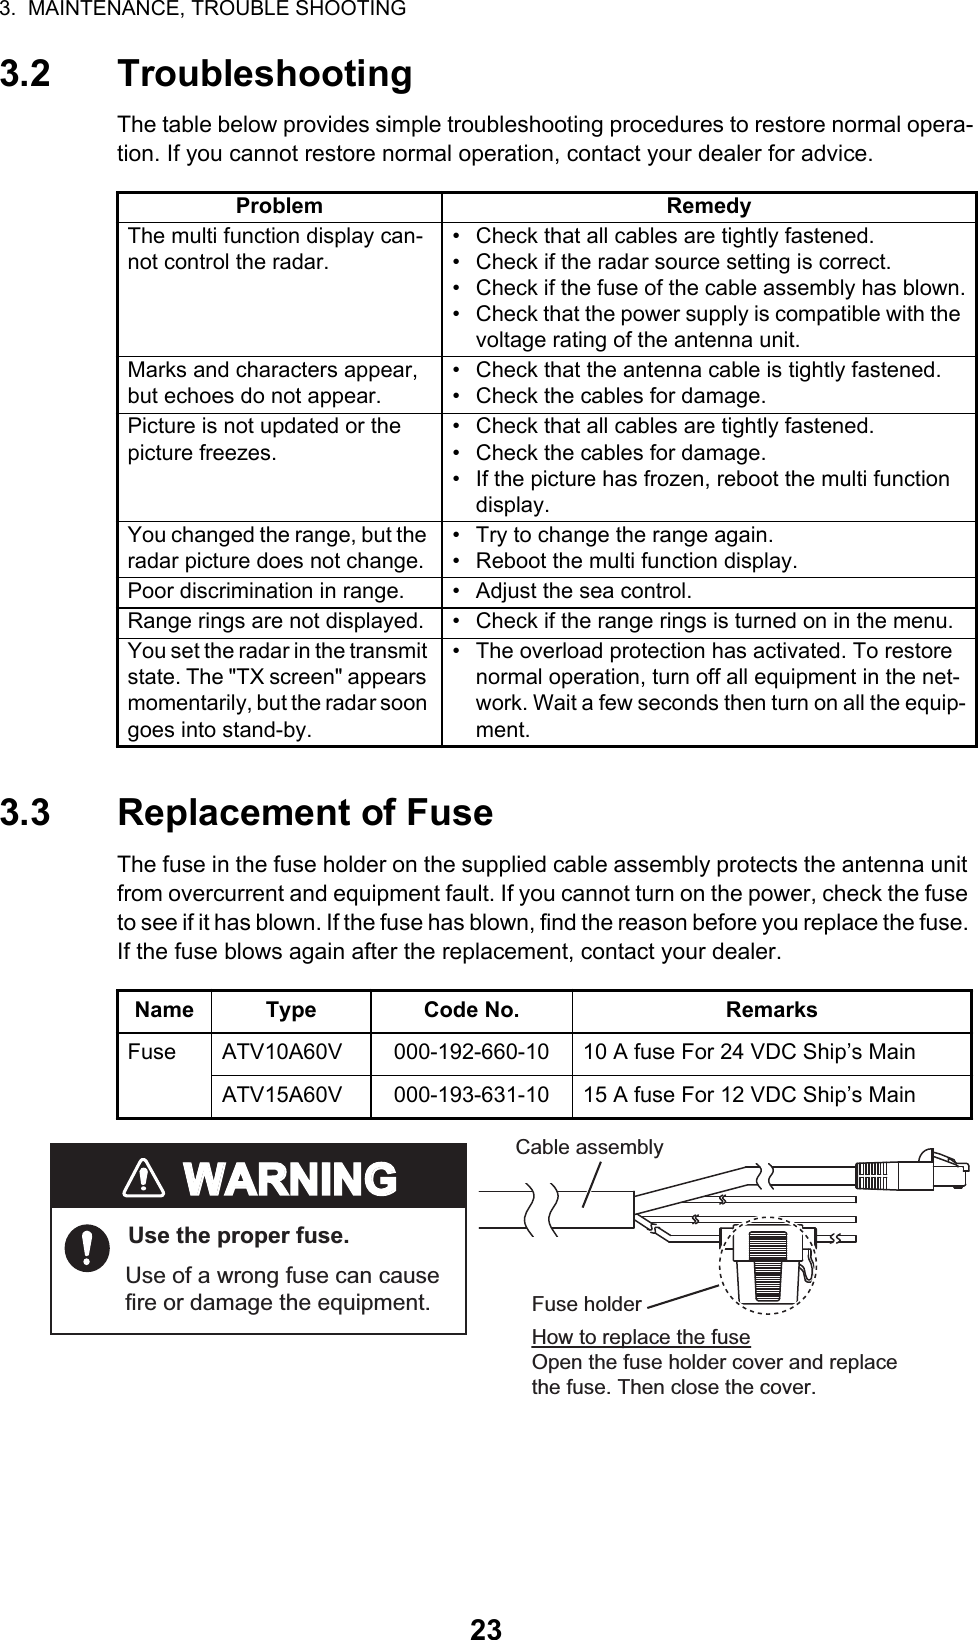 3.  MAINTENANCE, TROUBLE SHOOTING233.2 TroubleshootingThe table below provides simple troubleshooting procedures to restore normal opera-tion. If you cannot restore normal operation, contact your dealer for advice.3.3 Replacement of FuseThe fuse in the fuse holder on the supplied cable assembly protects the antenna unit from overcurrent and equipment fault. If you cannot turn on the power, check the fuse to see if it has blown. If the fuse has blown, find the reason before you replace the fuse. If the fuse blows again after the replacement, contact your dealer.Problem RemedyThe multi function display can-not control the radar.•  Check that all cables are tightly fastened.•  Check if the radar source setting is correct.•  Check if the fuse of the cable assembly has blown.•  Check that the power supply is compatible with the voltage rating of the antenna unit.Marks and characters appear, but echoes do not appear.•  Check that the antenna cable is tightly fastened.•  Check the cables for damage.Picture is not updated or the picture freezes.•  Check that all cables are tightly fastened.•  Check the cables for damage.•  If the picture has frozen, reboot the multi function display.You changed the range, but the radar picture does not change.•  Try to change the range again.•  Reboot the multi function display.Poor discrimination in range. •  Adjust the sea control.Range rings are not displayed. •  Check if the range rings is turned on in the menu.You set the radar in the transmit state. The &quot;TX screen&quot; appears momentarily, but the radar soon goes into stand-by.•  The overload protection has activated. To restore normal operation, turn off all equipment in the net-work. Wait a few seconds then turn on all the equip-ment.Name Type Code No. RemarksFuse ATV10A60V 000-192-660-10 10 A fuse For 24 VDC Ship’s MainATV15A60V 000-193-631-10 15 A fuse For 12 VDC Ship’s MainWARNINGWARNINGUse the proper fuse.Use of a wrong fuse can cause fire or damage the equipment.Fuse holderHow to replace the fuseOpen the fuse holder cover and replace the fuse. Then close the cover.Cable assembly